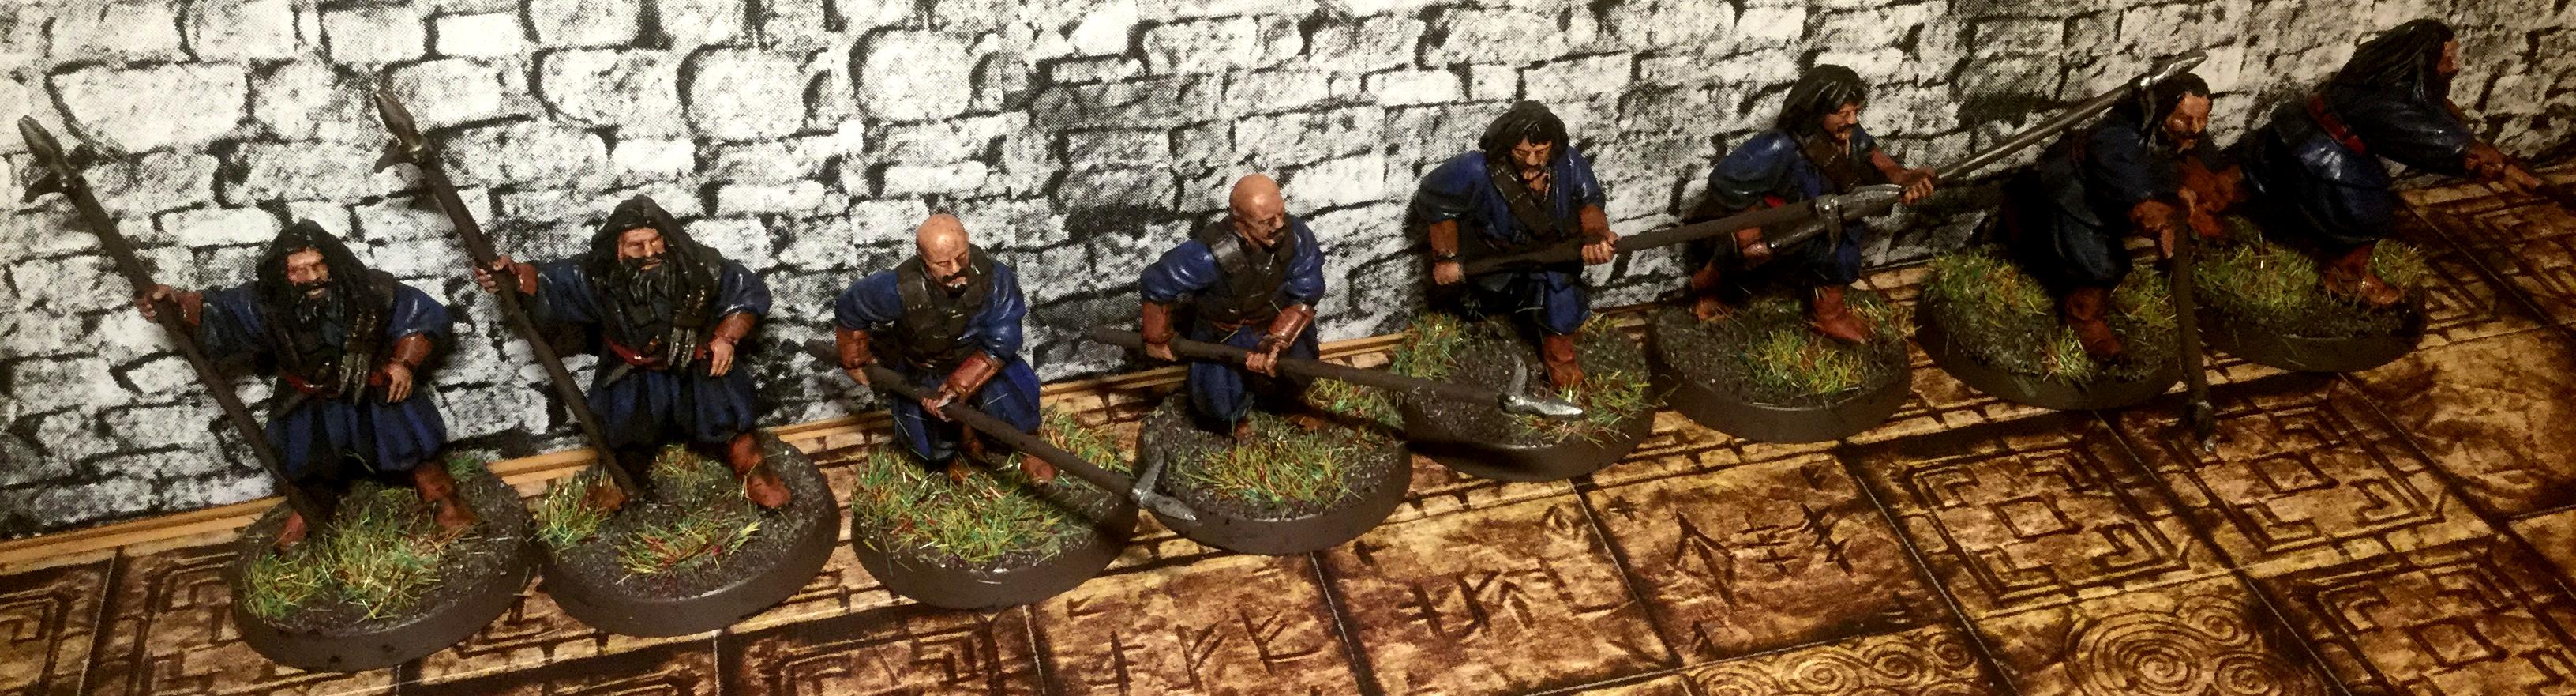 Corsairs with Spears